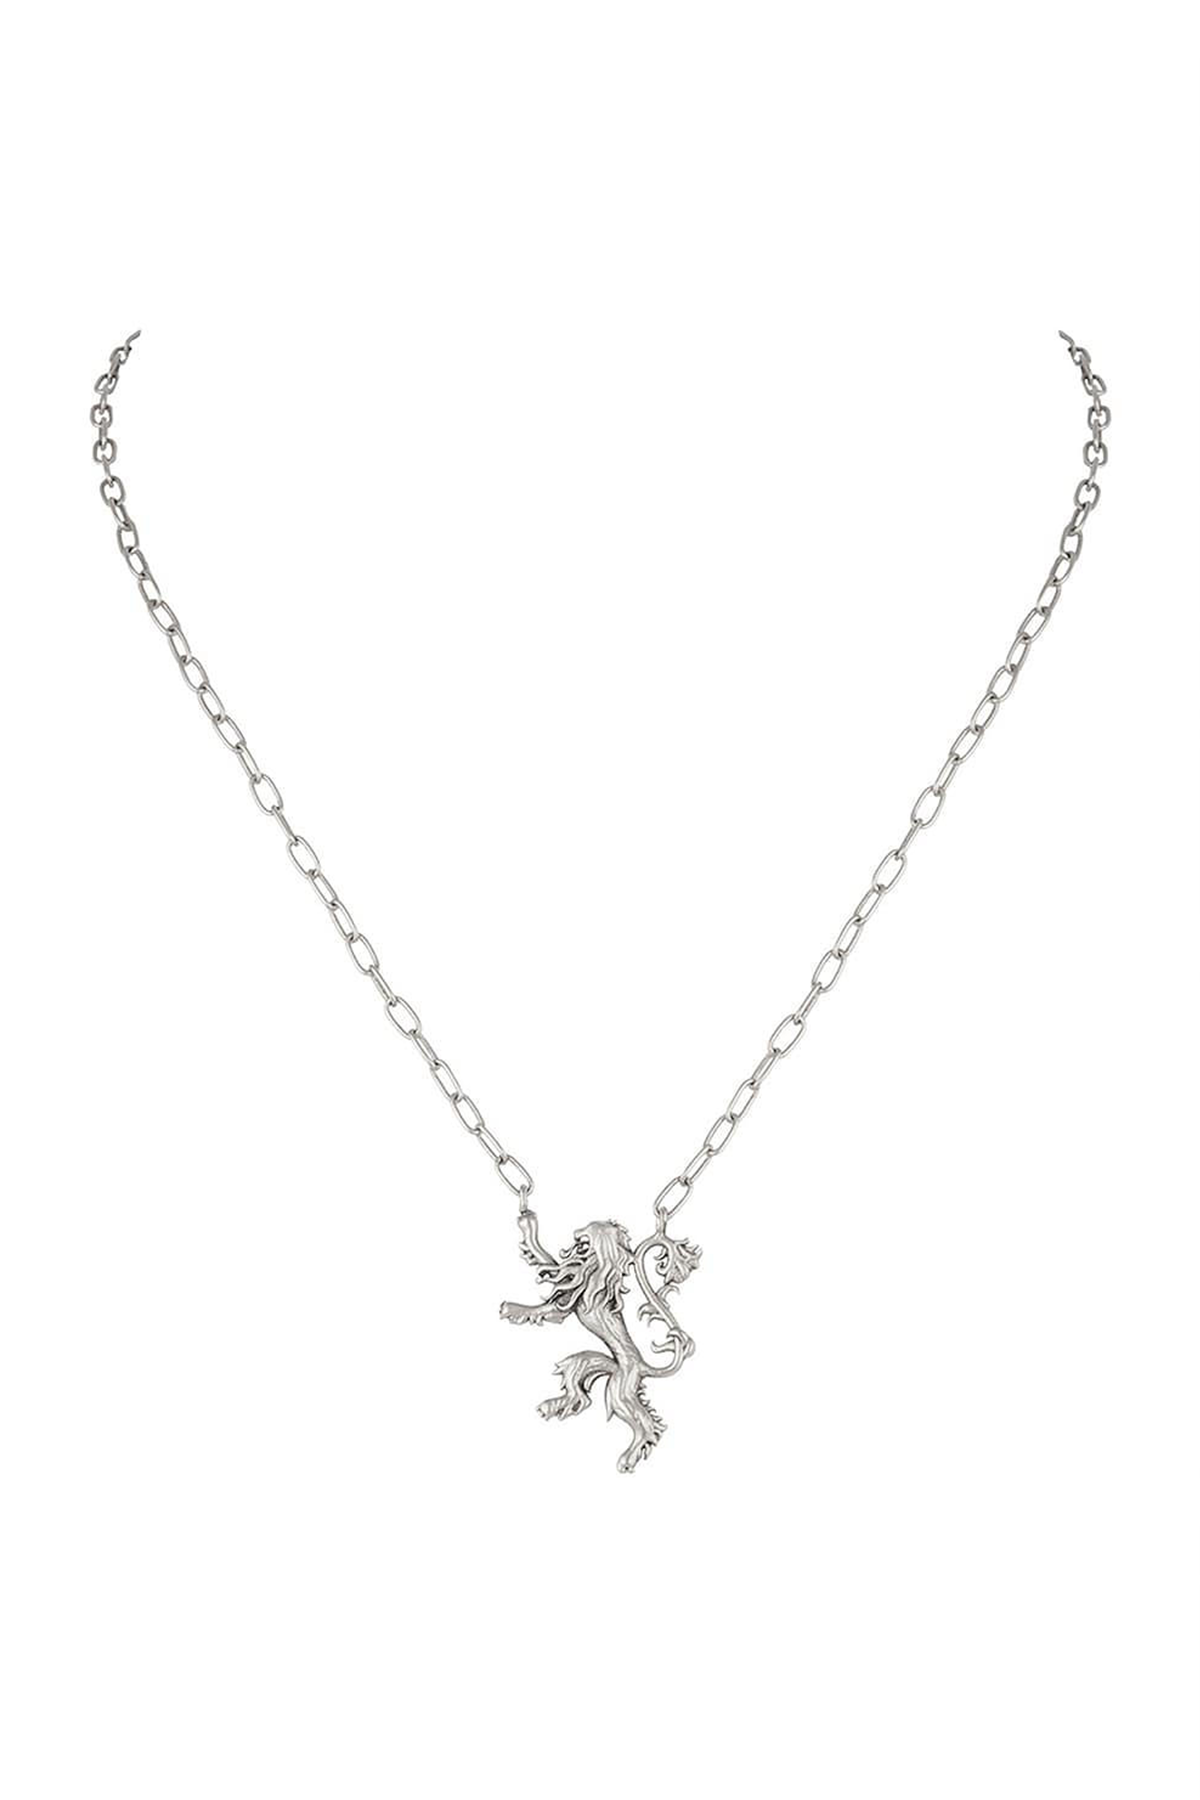 The House of Lannister Chain Silver